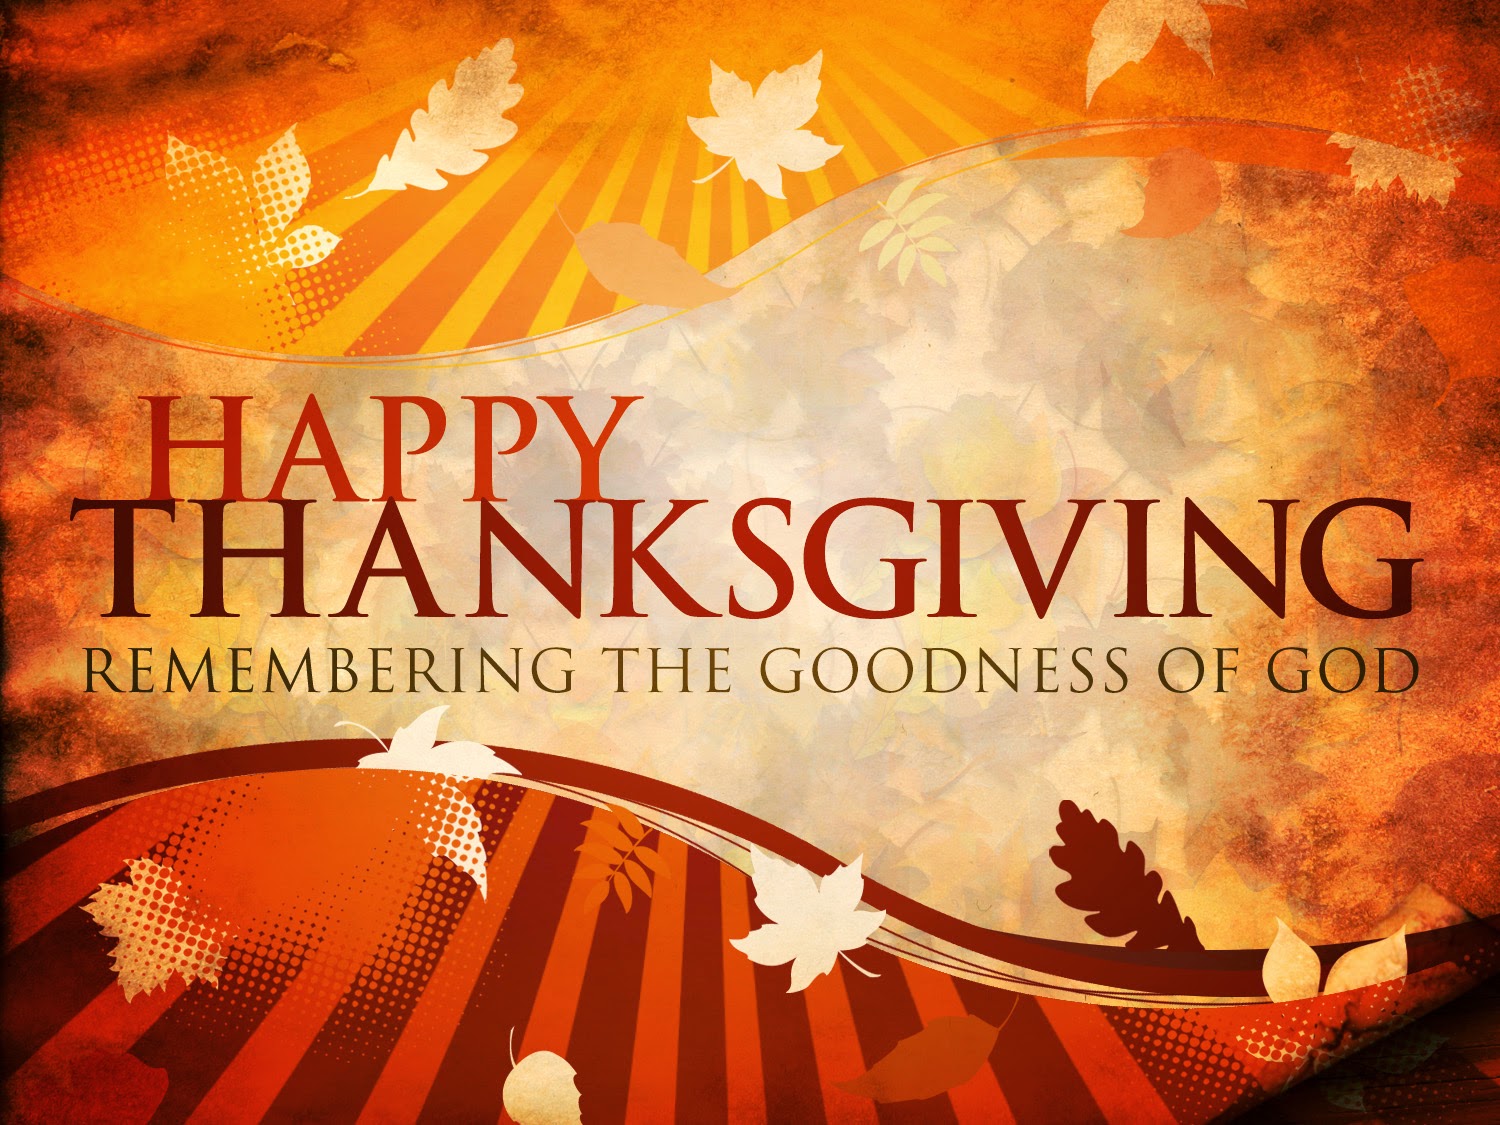 Happy Thanksgiving day 2014 SMS, Poems, Quotes, Wishes, Wallpaper, Images